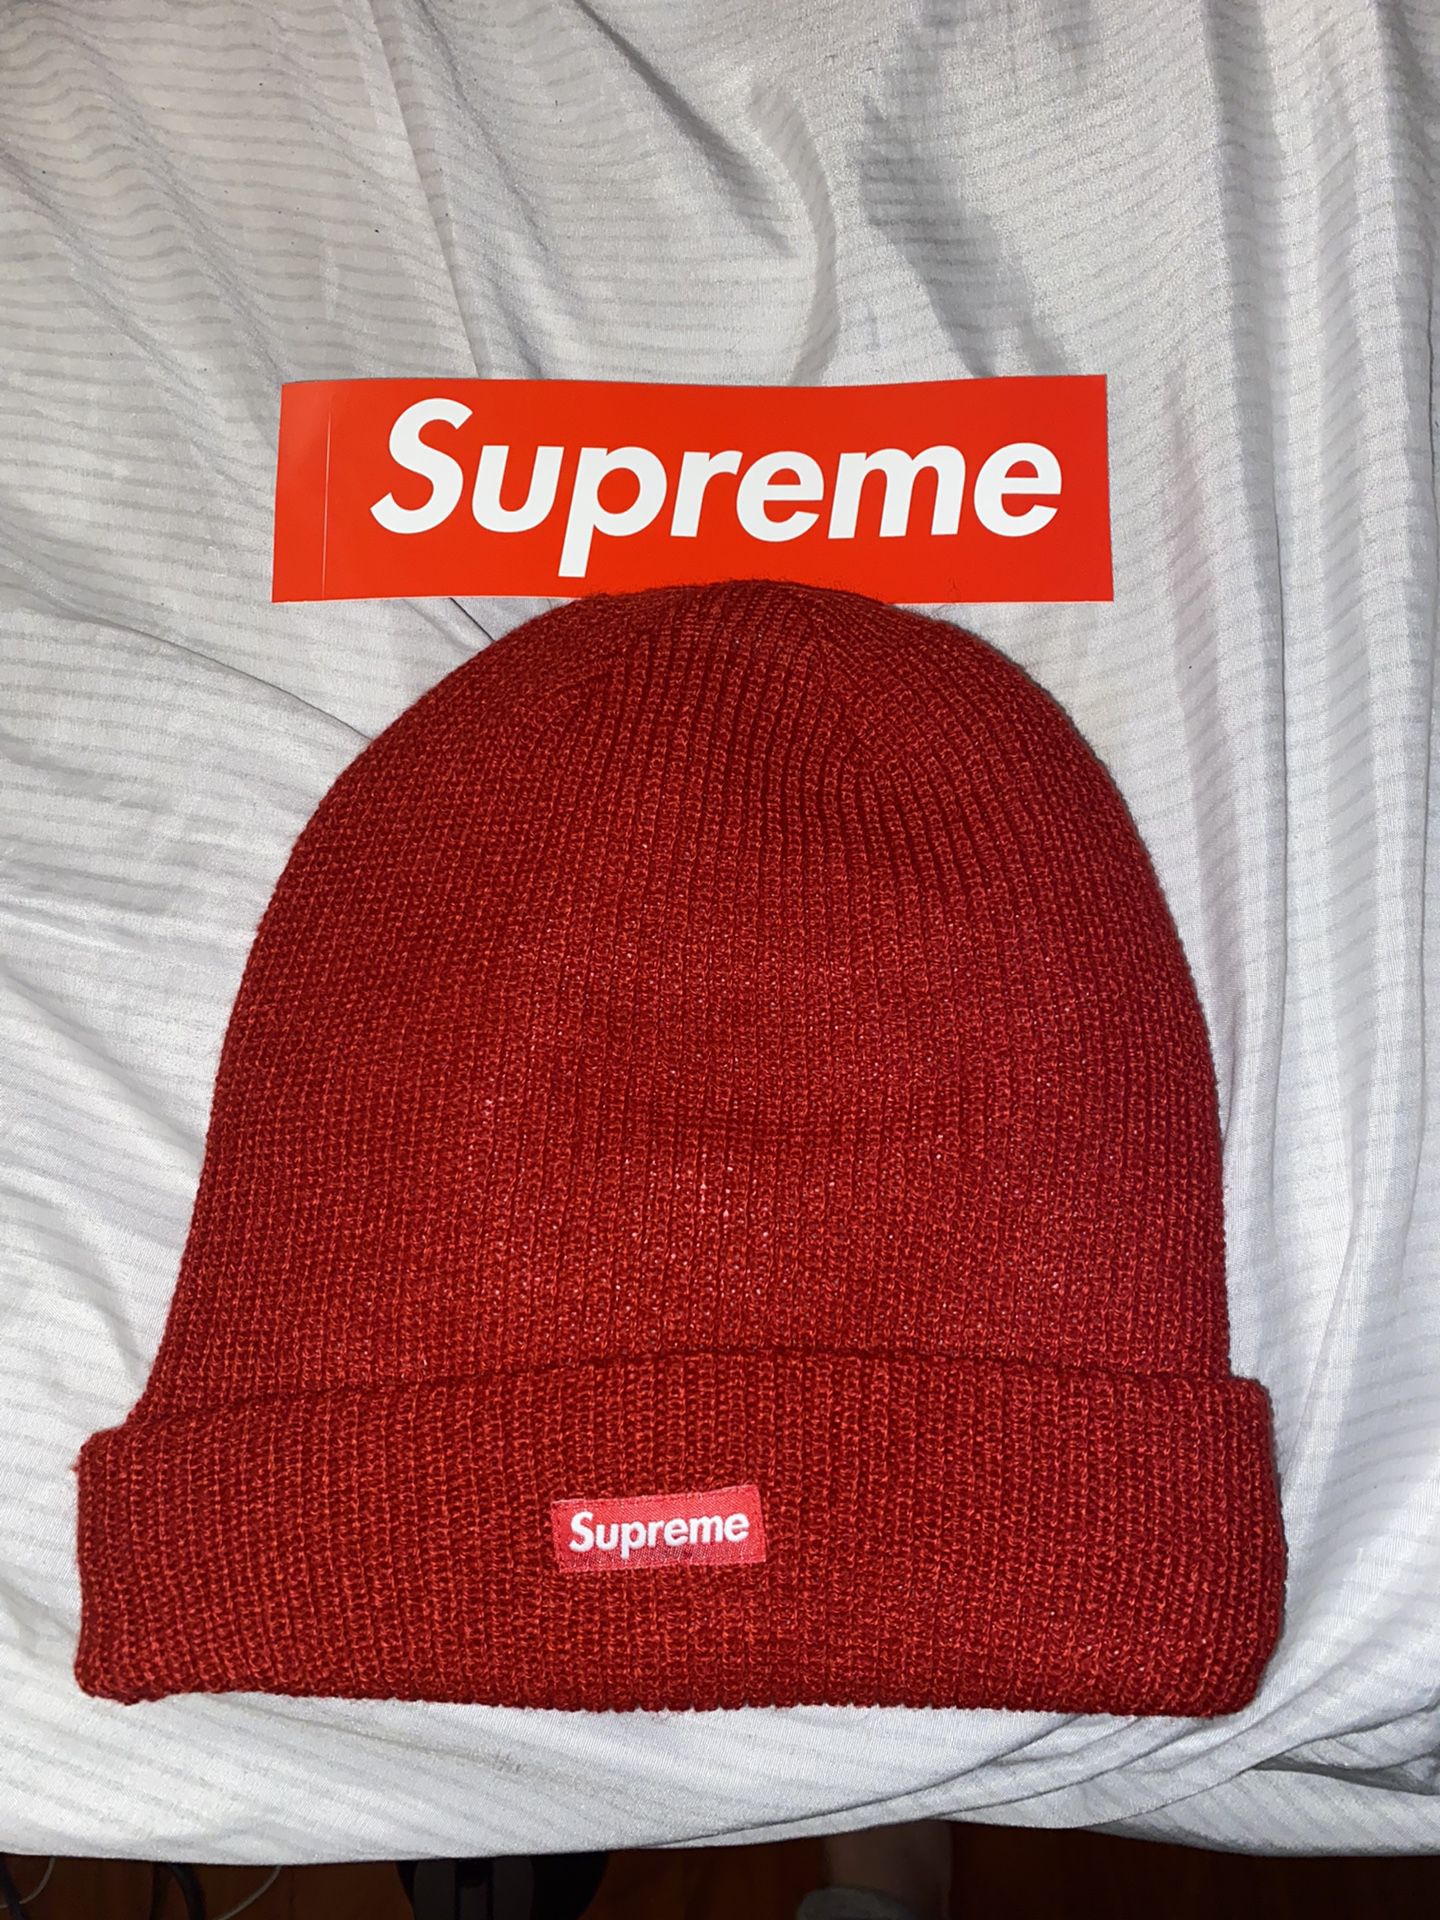 Supreme Gore-tex Beanie for Sale in Stony Brook, NY - OfferUp